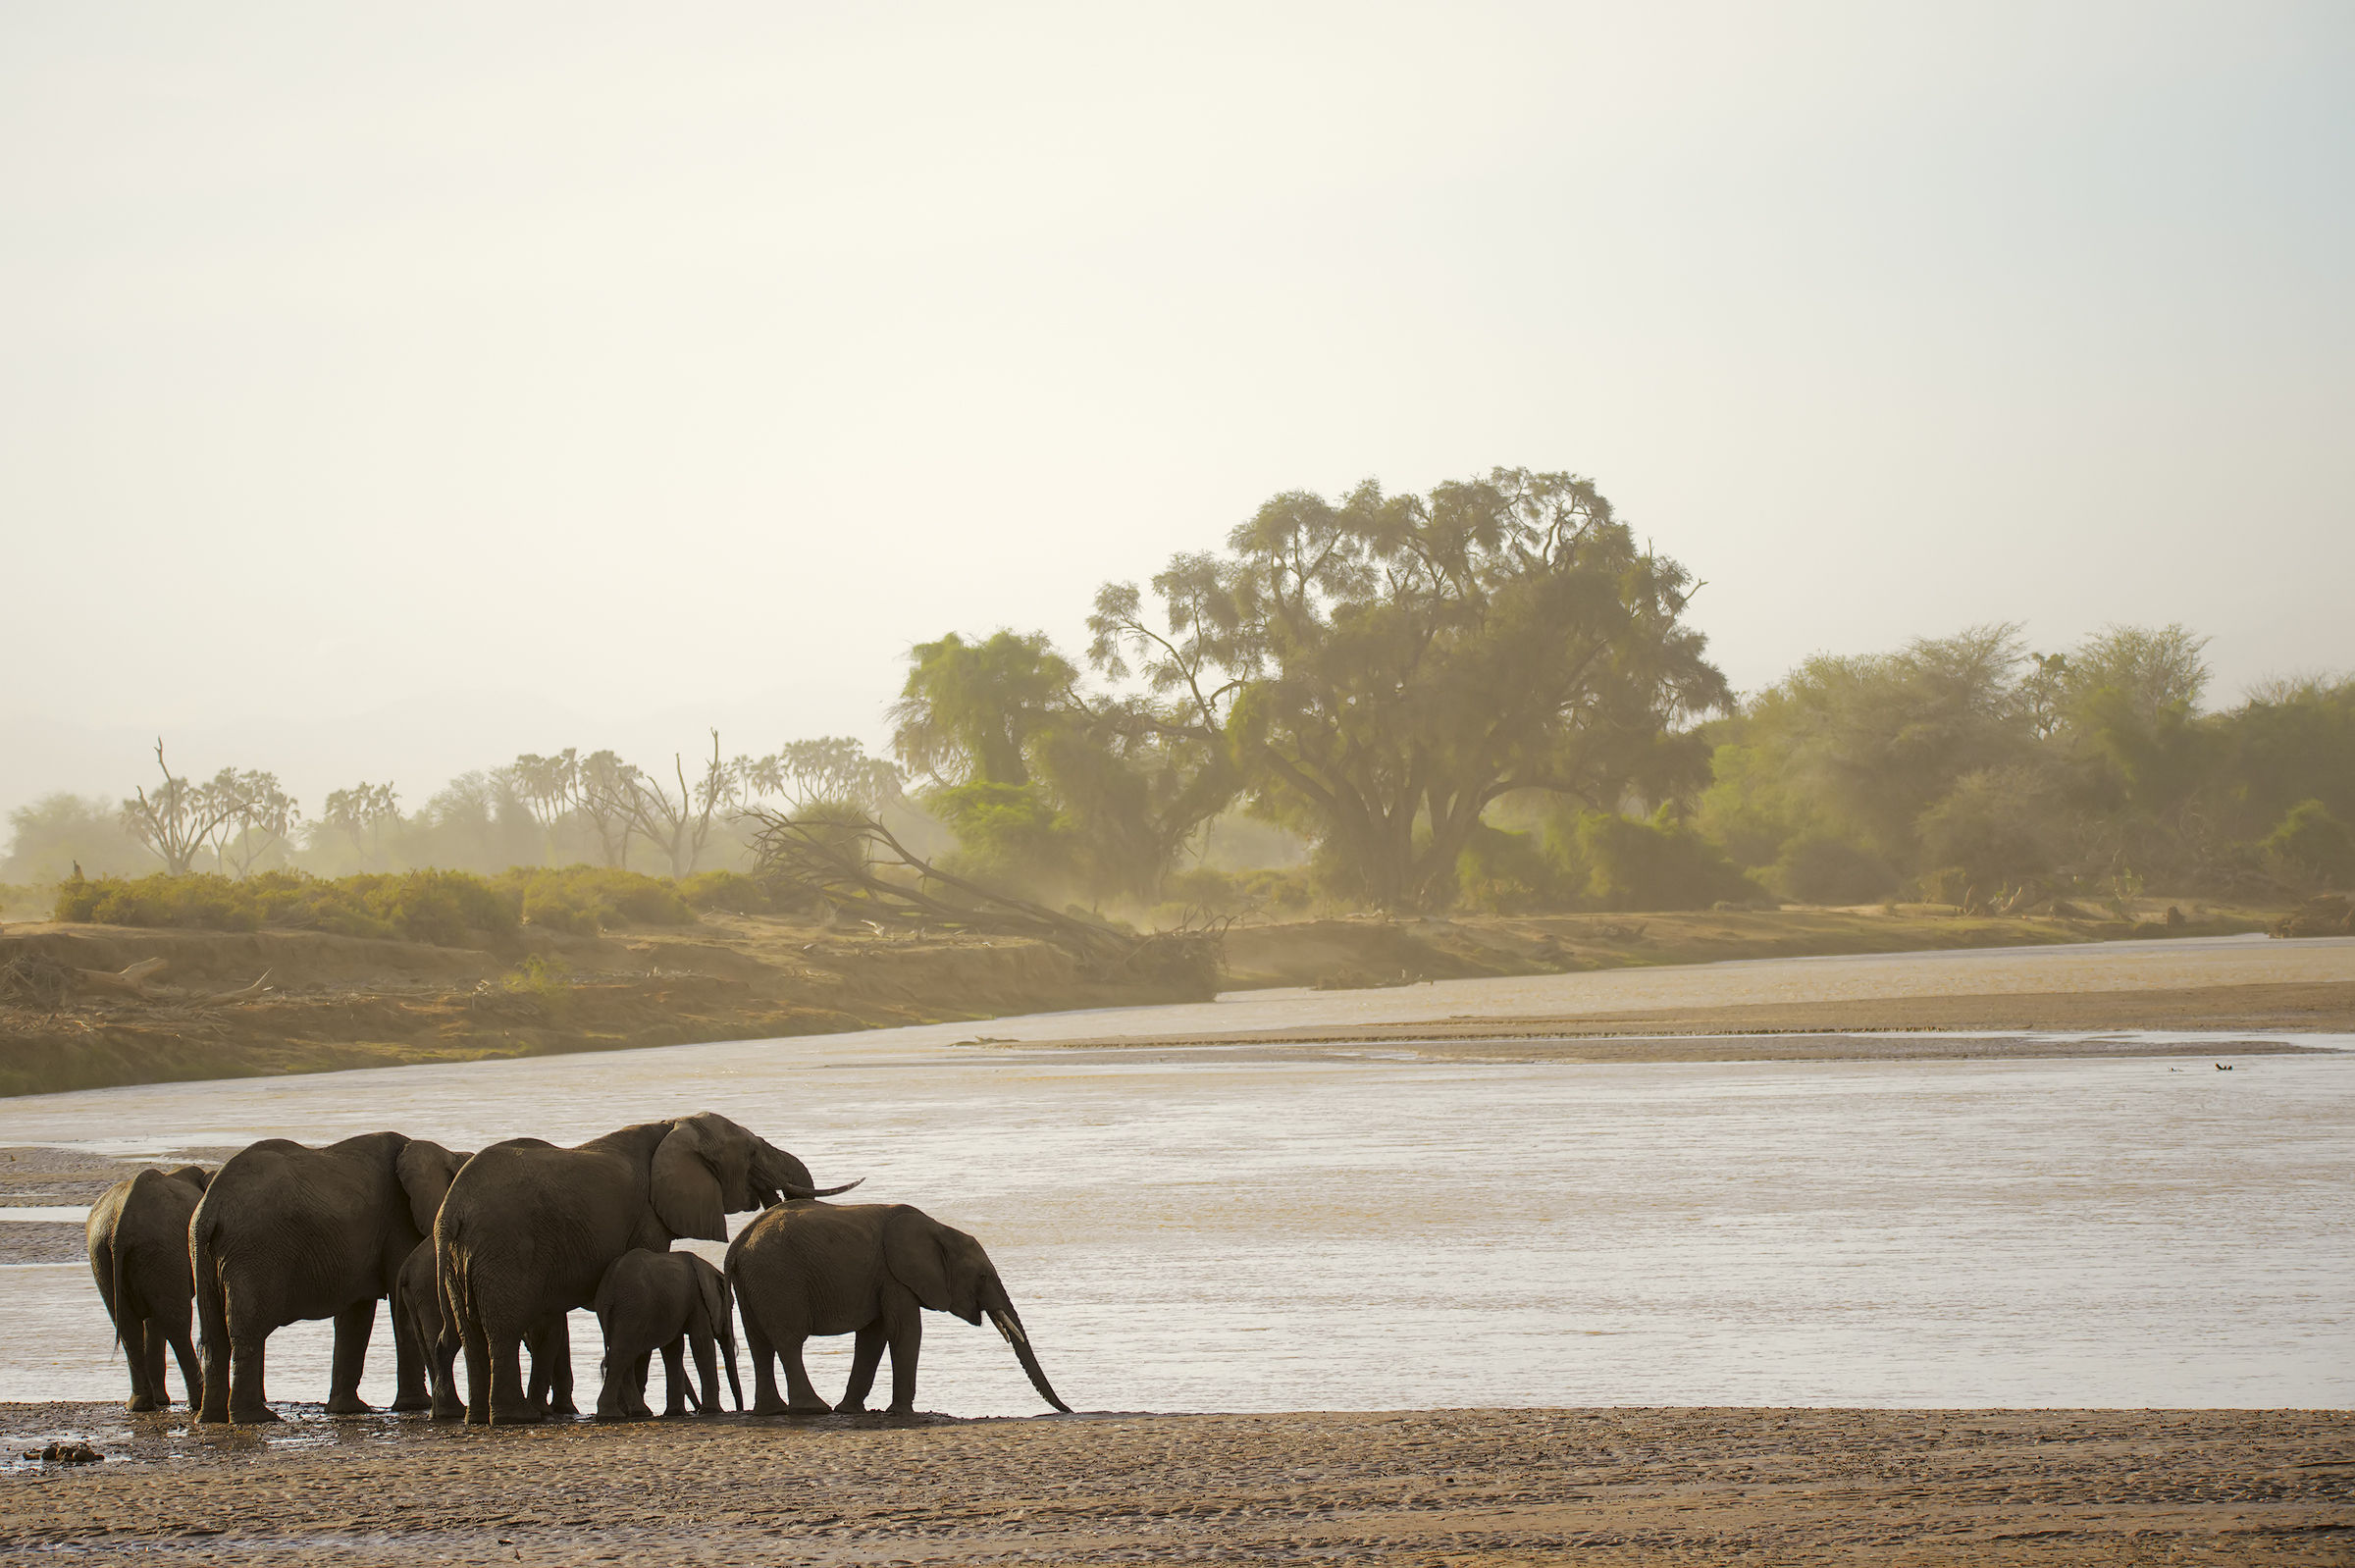 Elephants at the golden river...